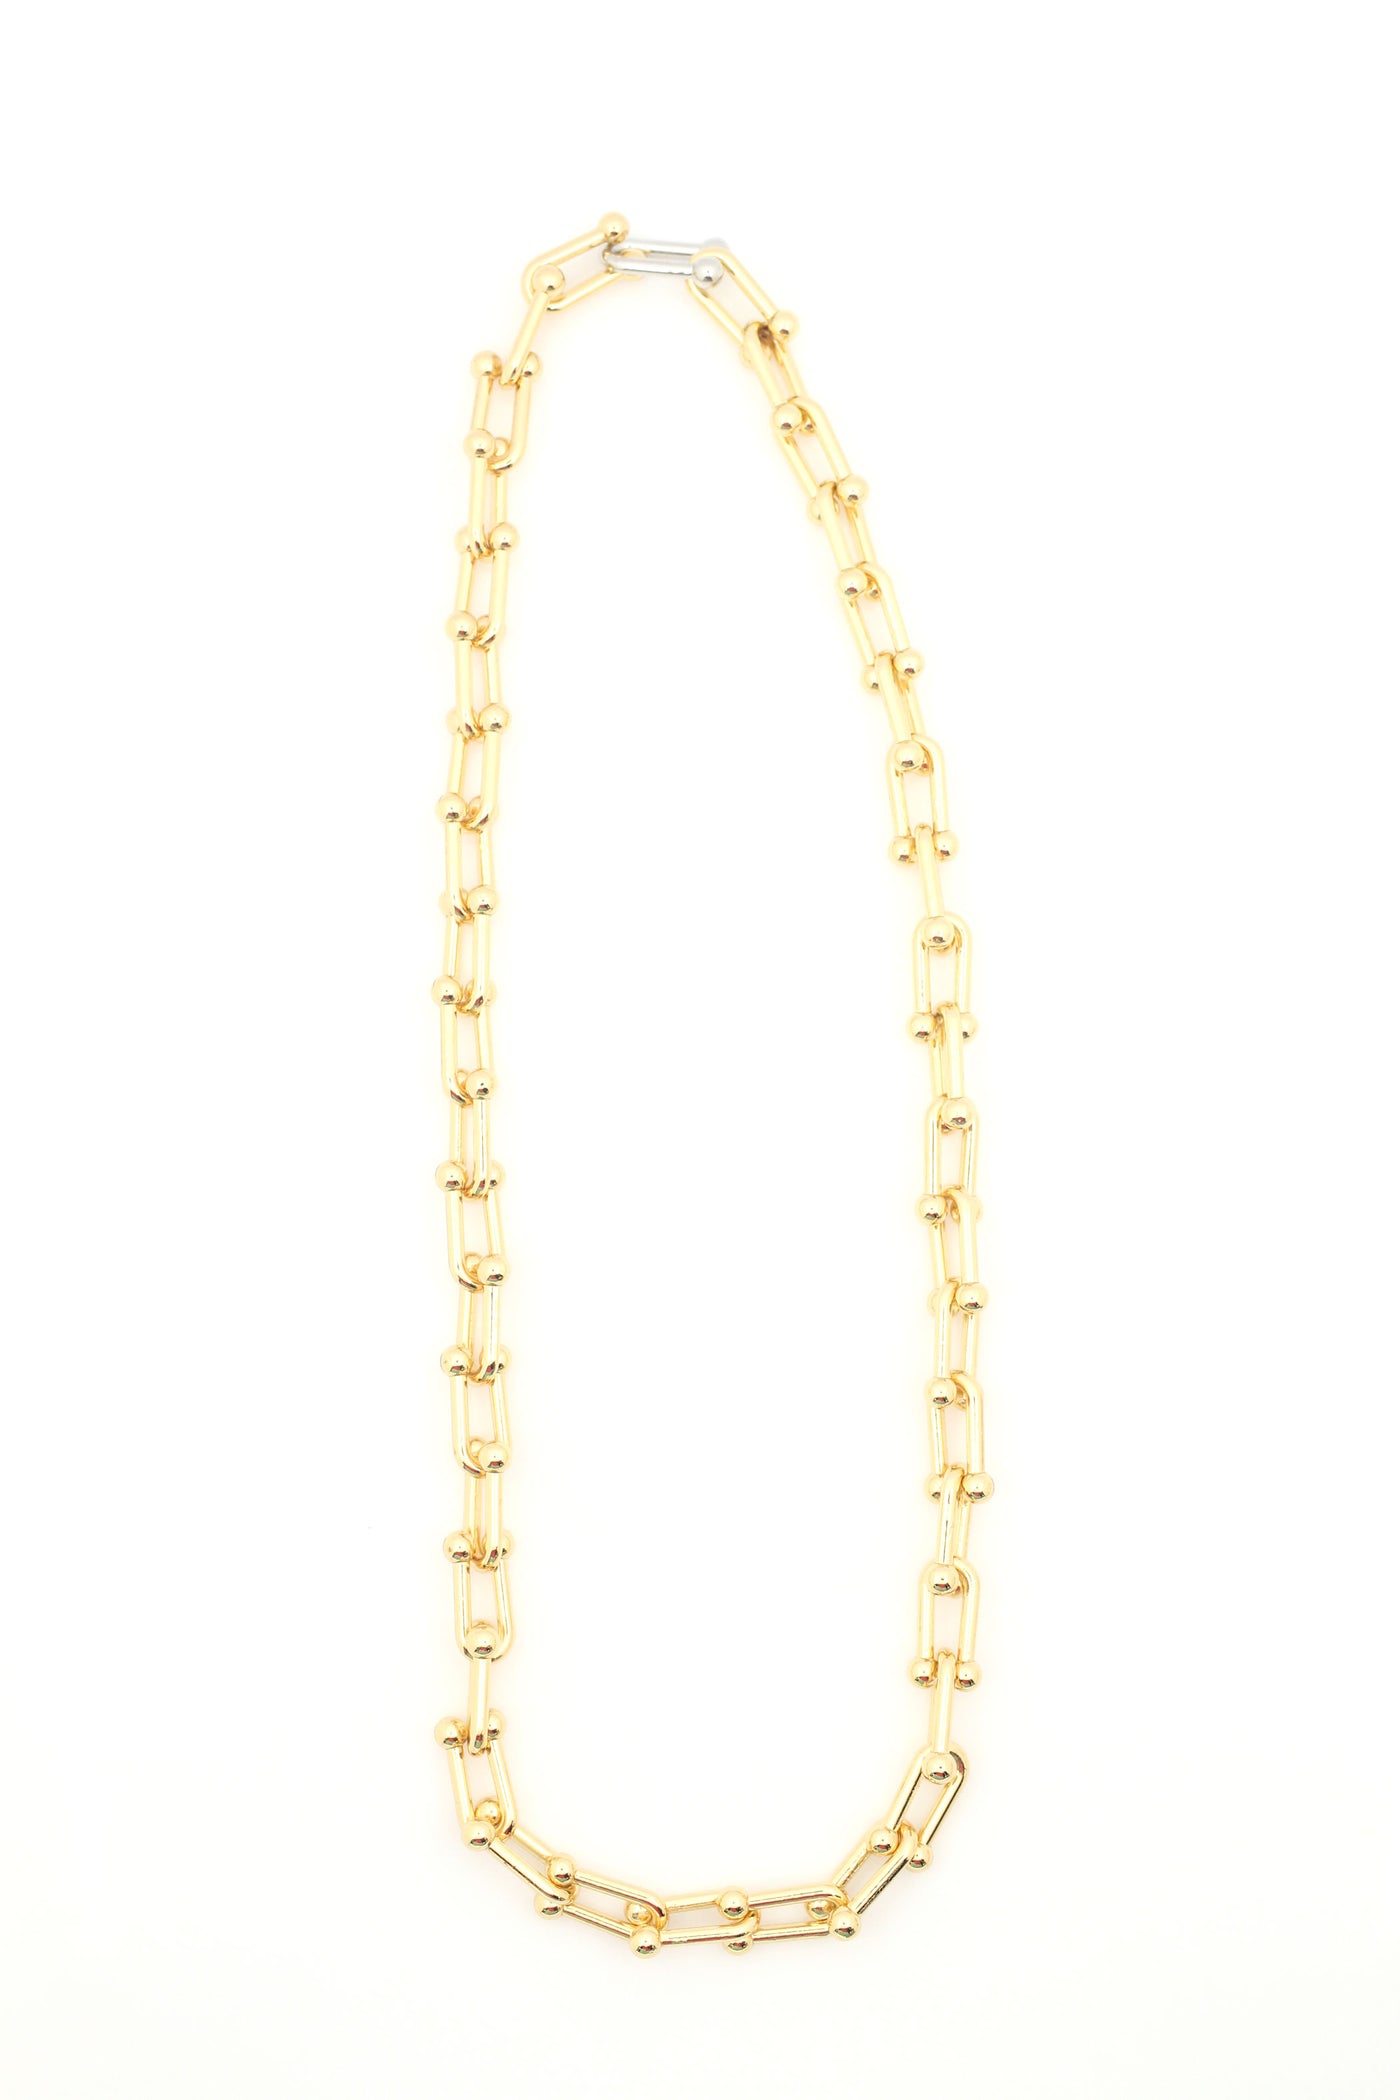 Pop Chain Necklace, Assorted Colors, 18